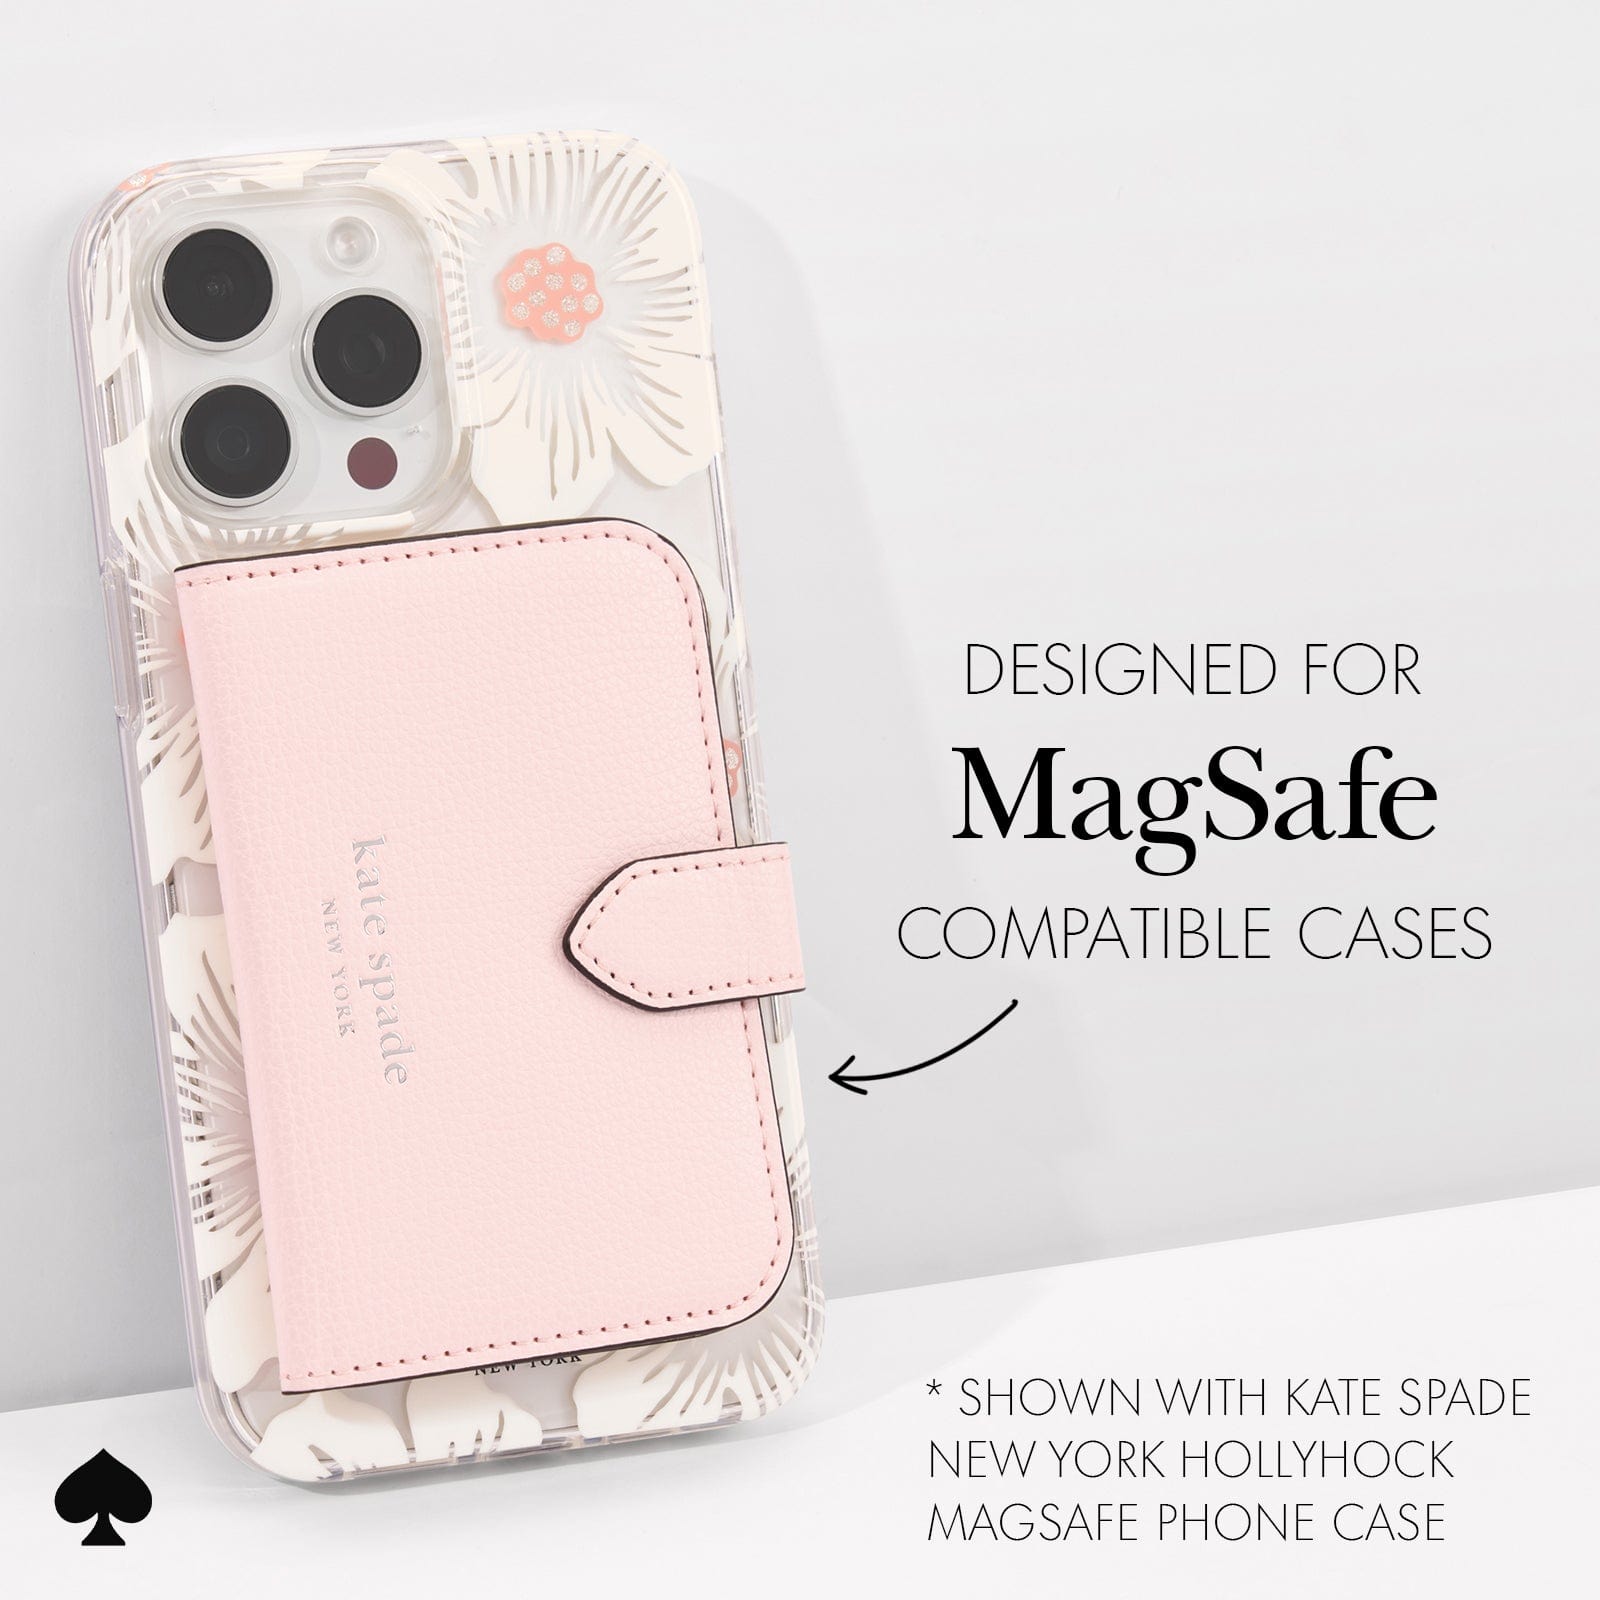 DESIGNED FOR MAGSAFE COMPATIBLE CASES. SHOWN WITH KATE SPADE NEW YORK HOLLYHOCK MAGSAFE PHONE CASE